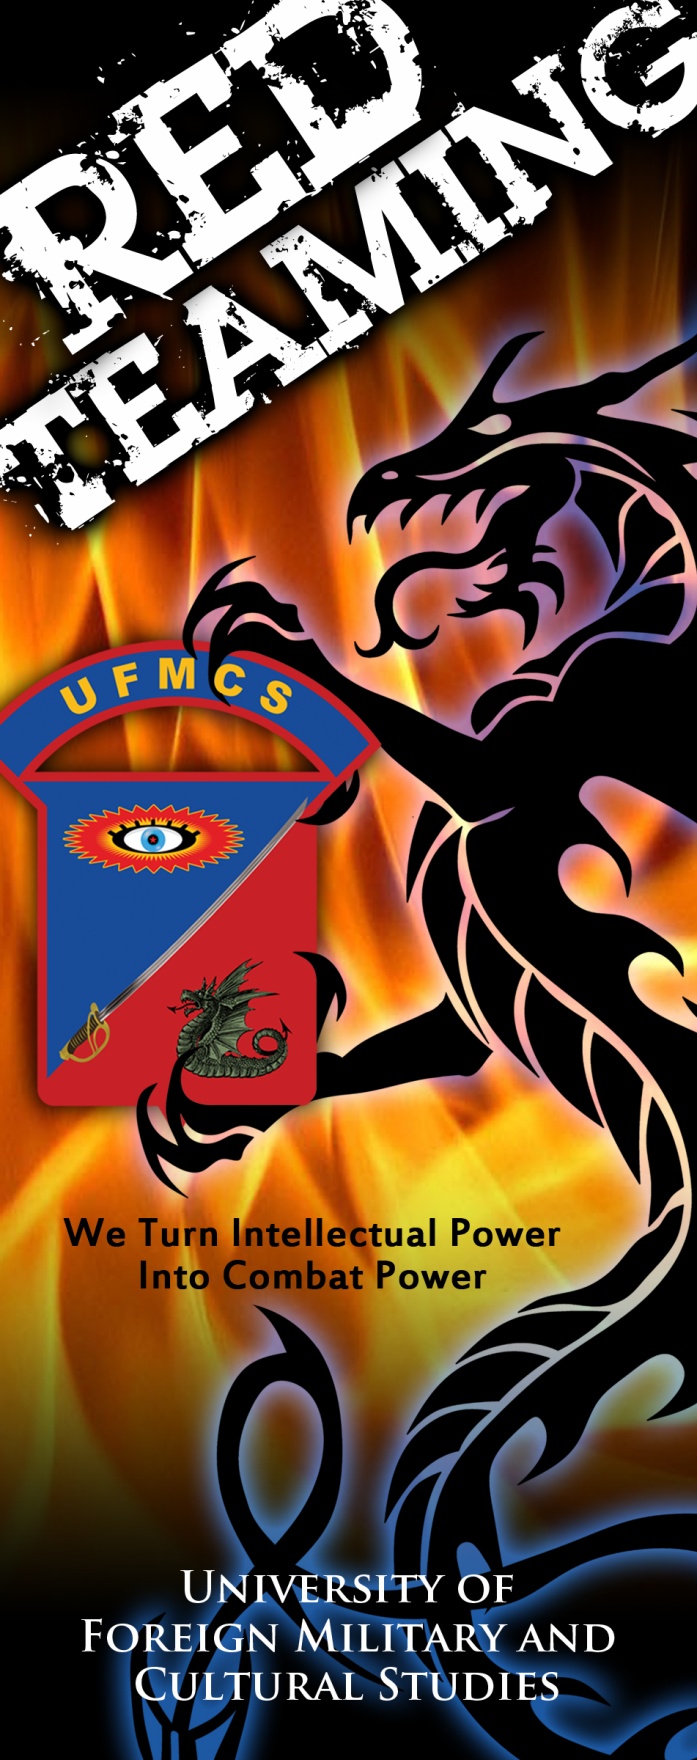 Image of a dragon holding the UFMCS logo